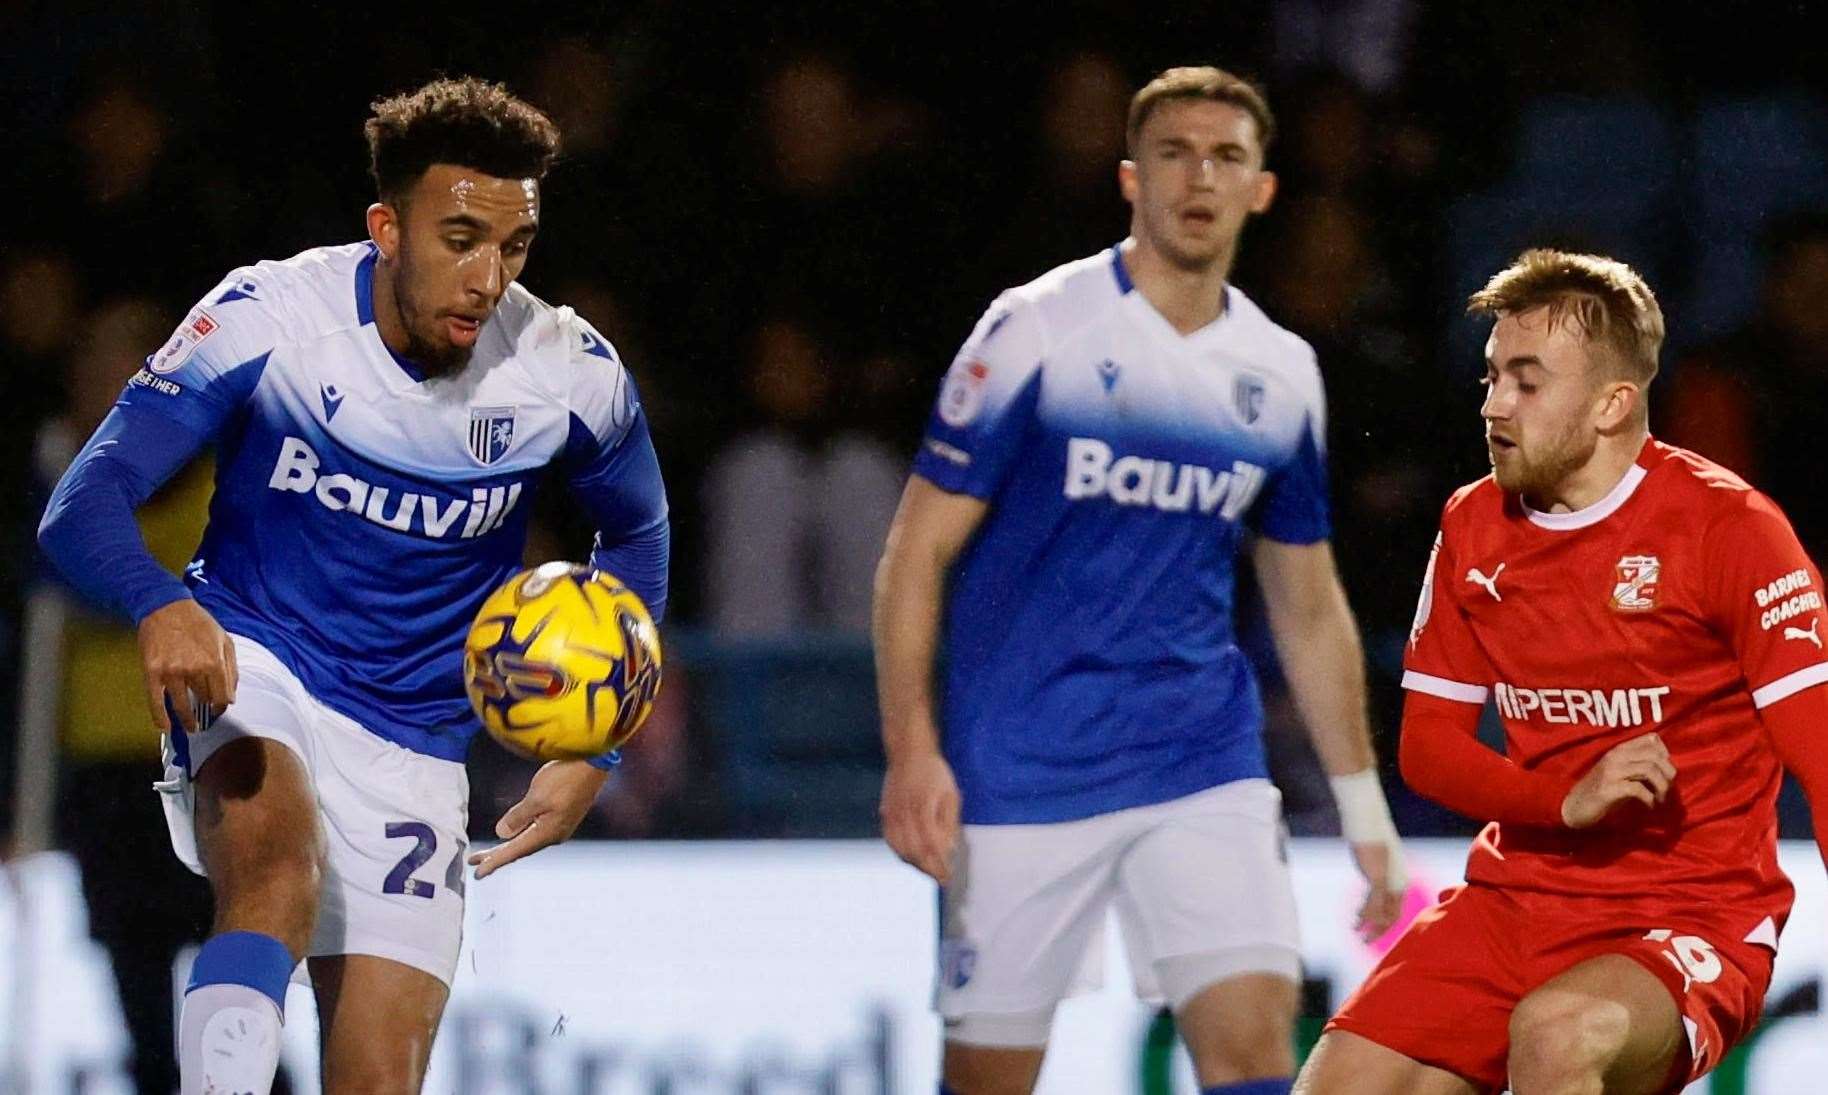 Remeao Hutton in action in Gillingham’s 2-2 League 2 draw at home to Swindon on Tuesday. Picture: @Julian_KPI